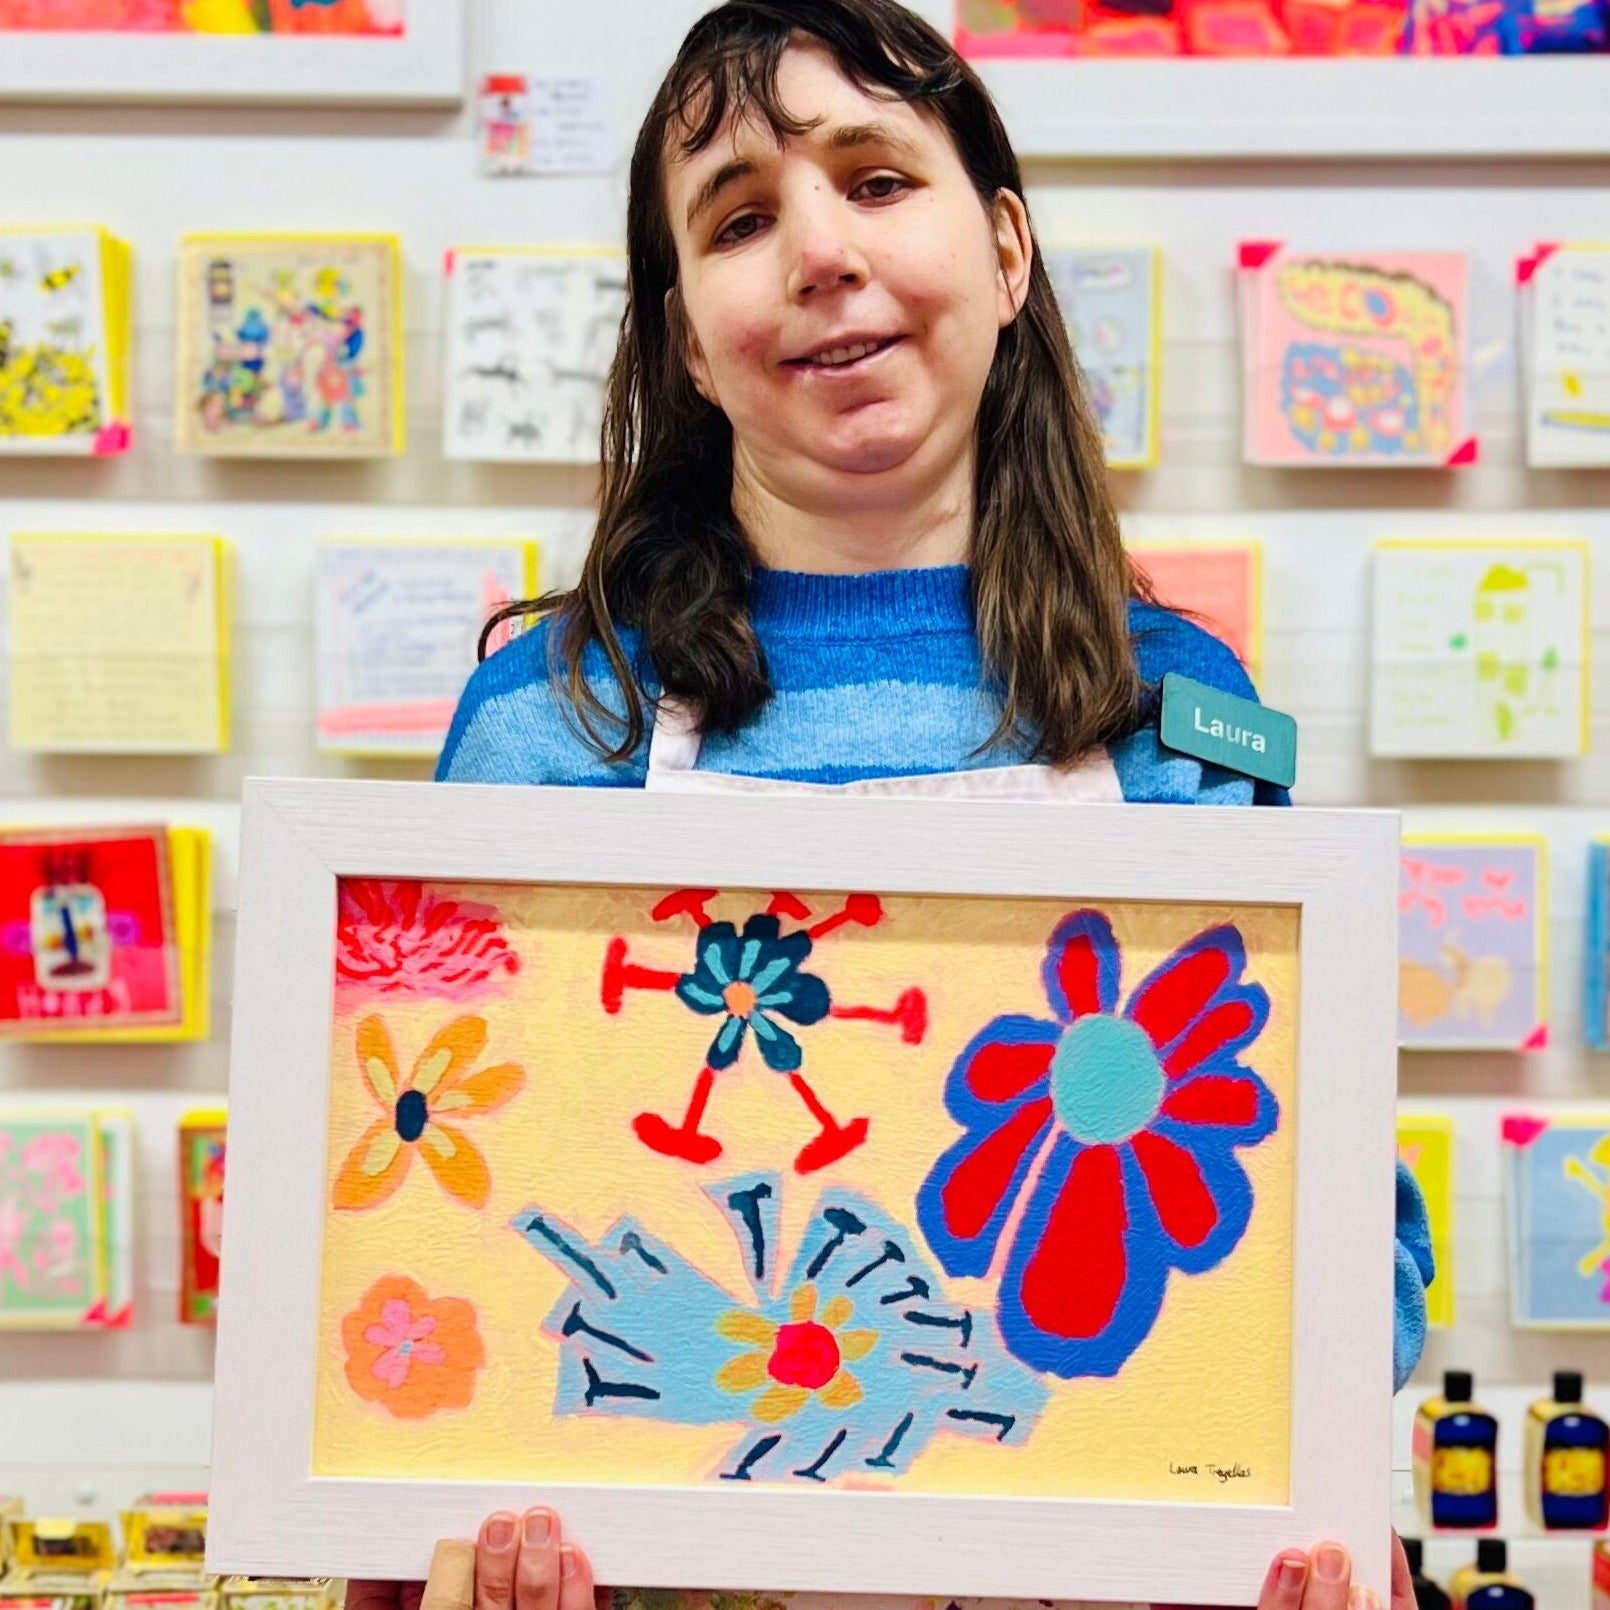 Female artist holding Framed painting of flowers in blues, purples and yellow